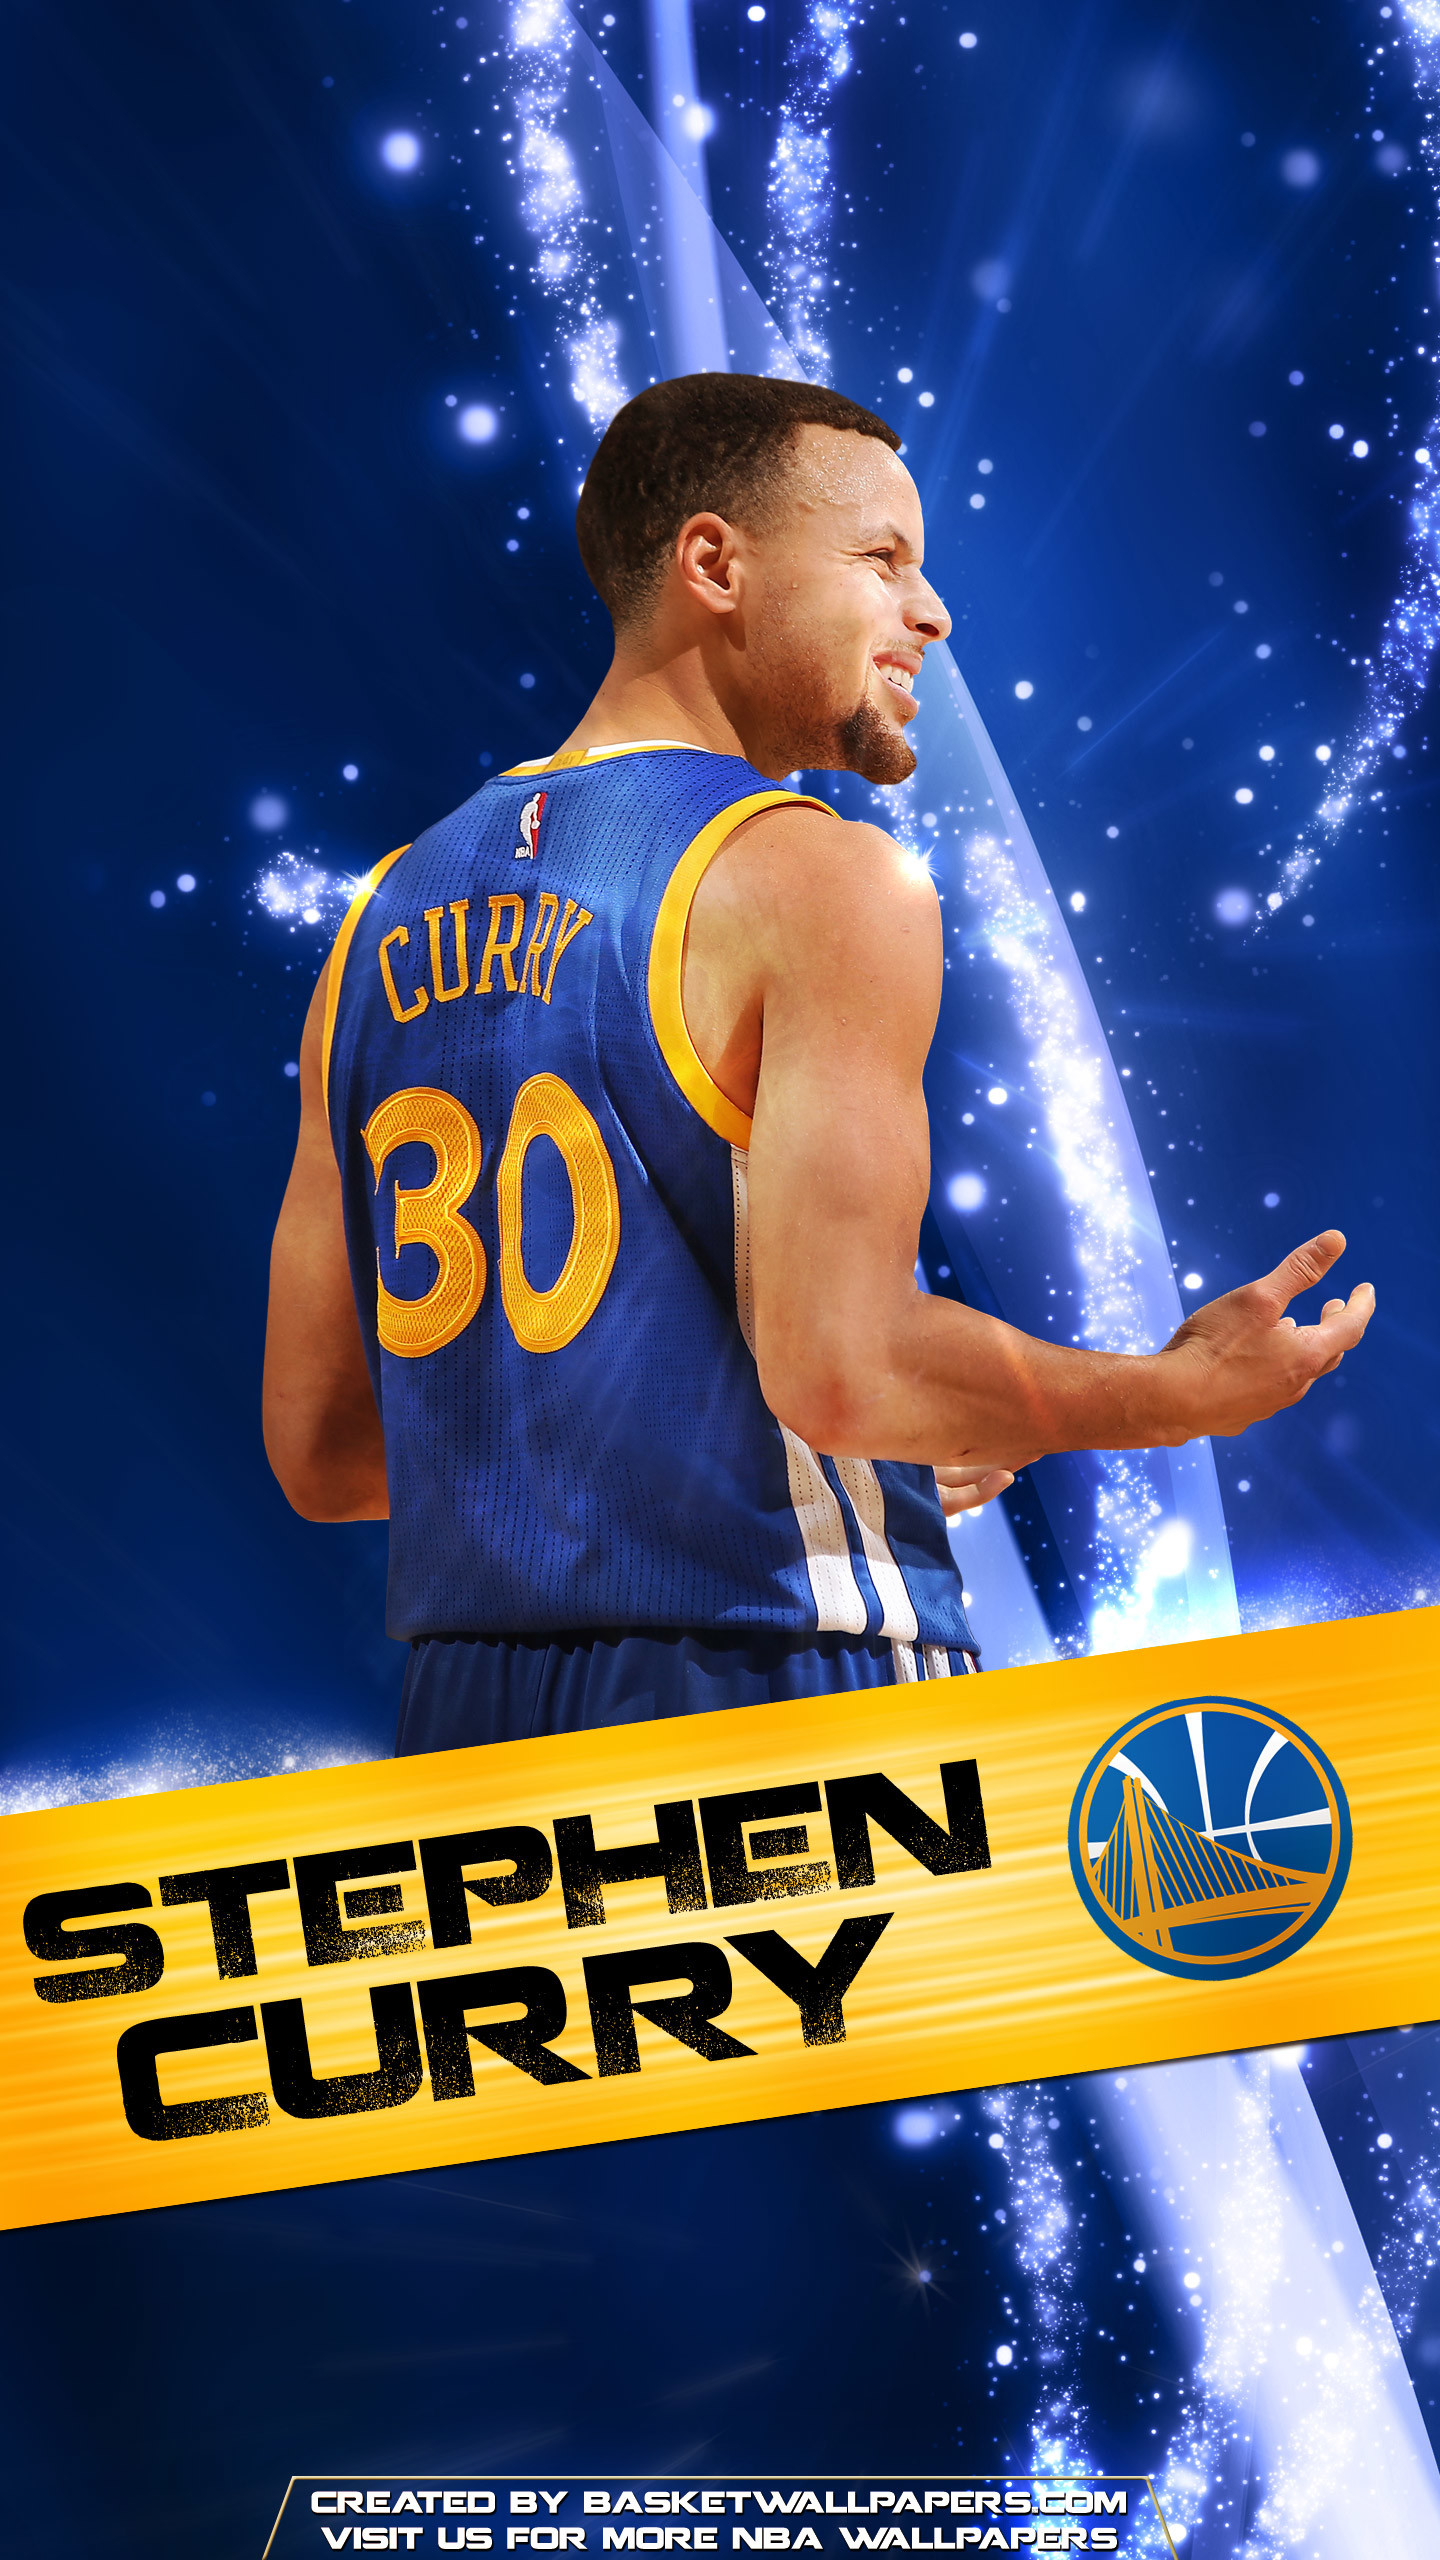 Cool Nba Wallpapers For Iphone 65 Images